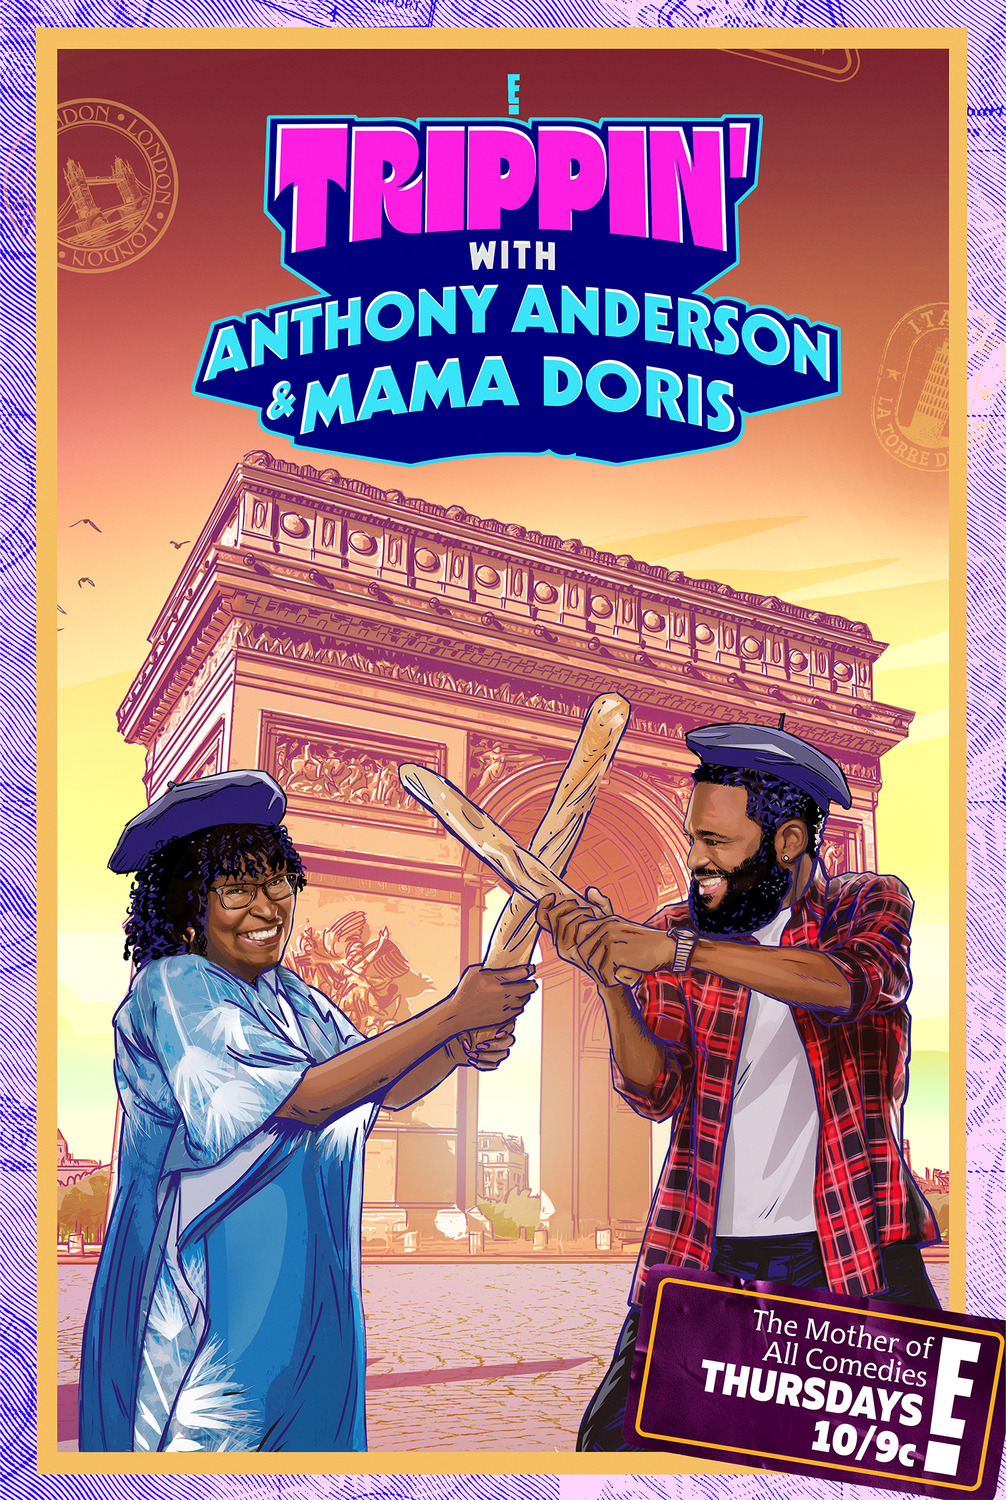 Extra Large TV Poster Image for Trippin' with Anthony Anderson and Mama Doris (#3 of 5)